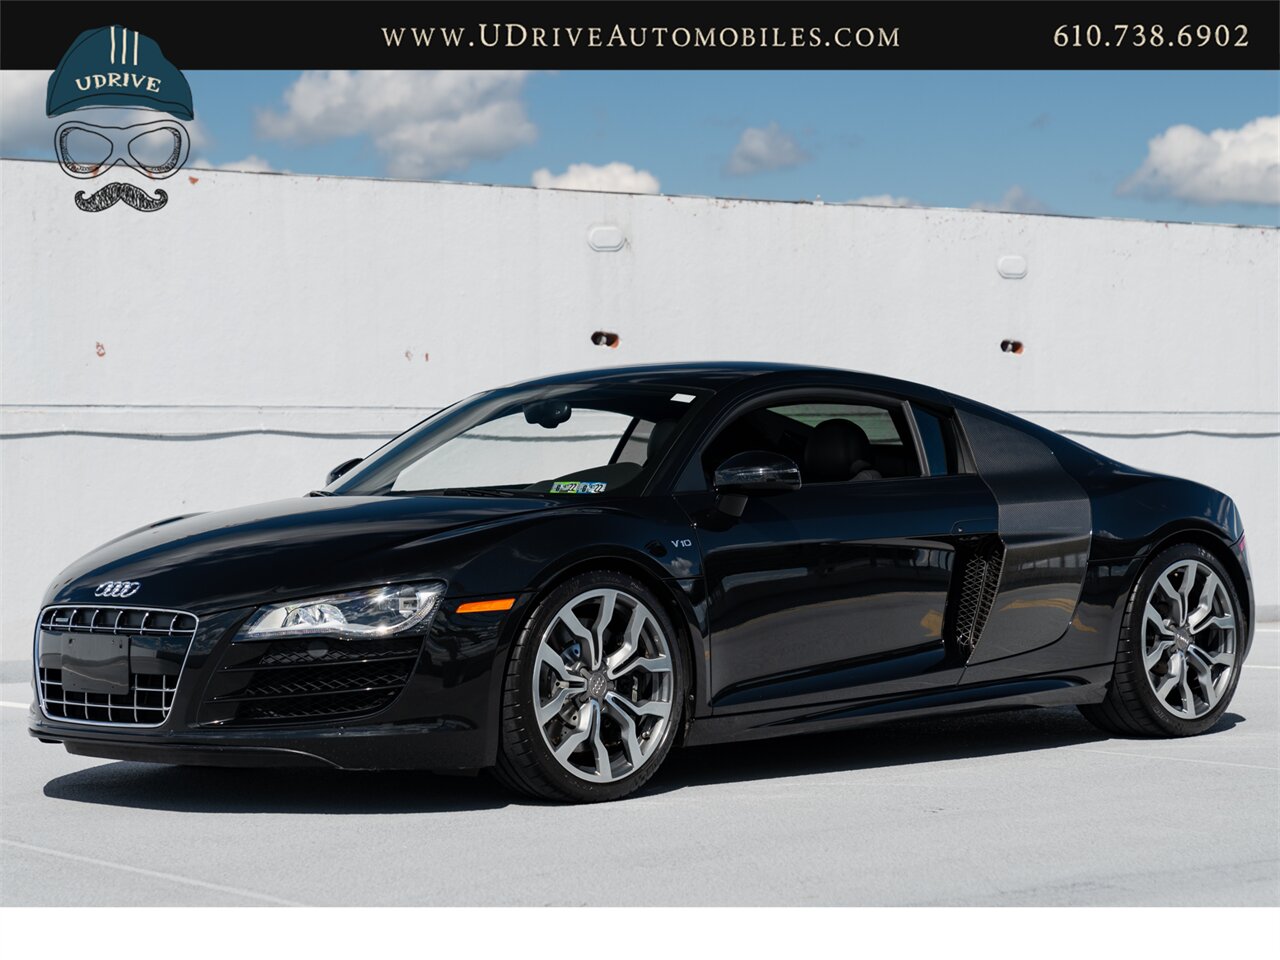 2011 Audi R8 5.2 Quattro  V10 6 Speed Manual - Photo 11 - West Chester, PA 19382